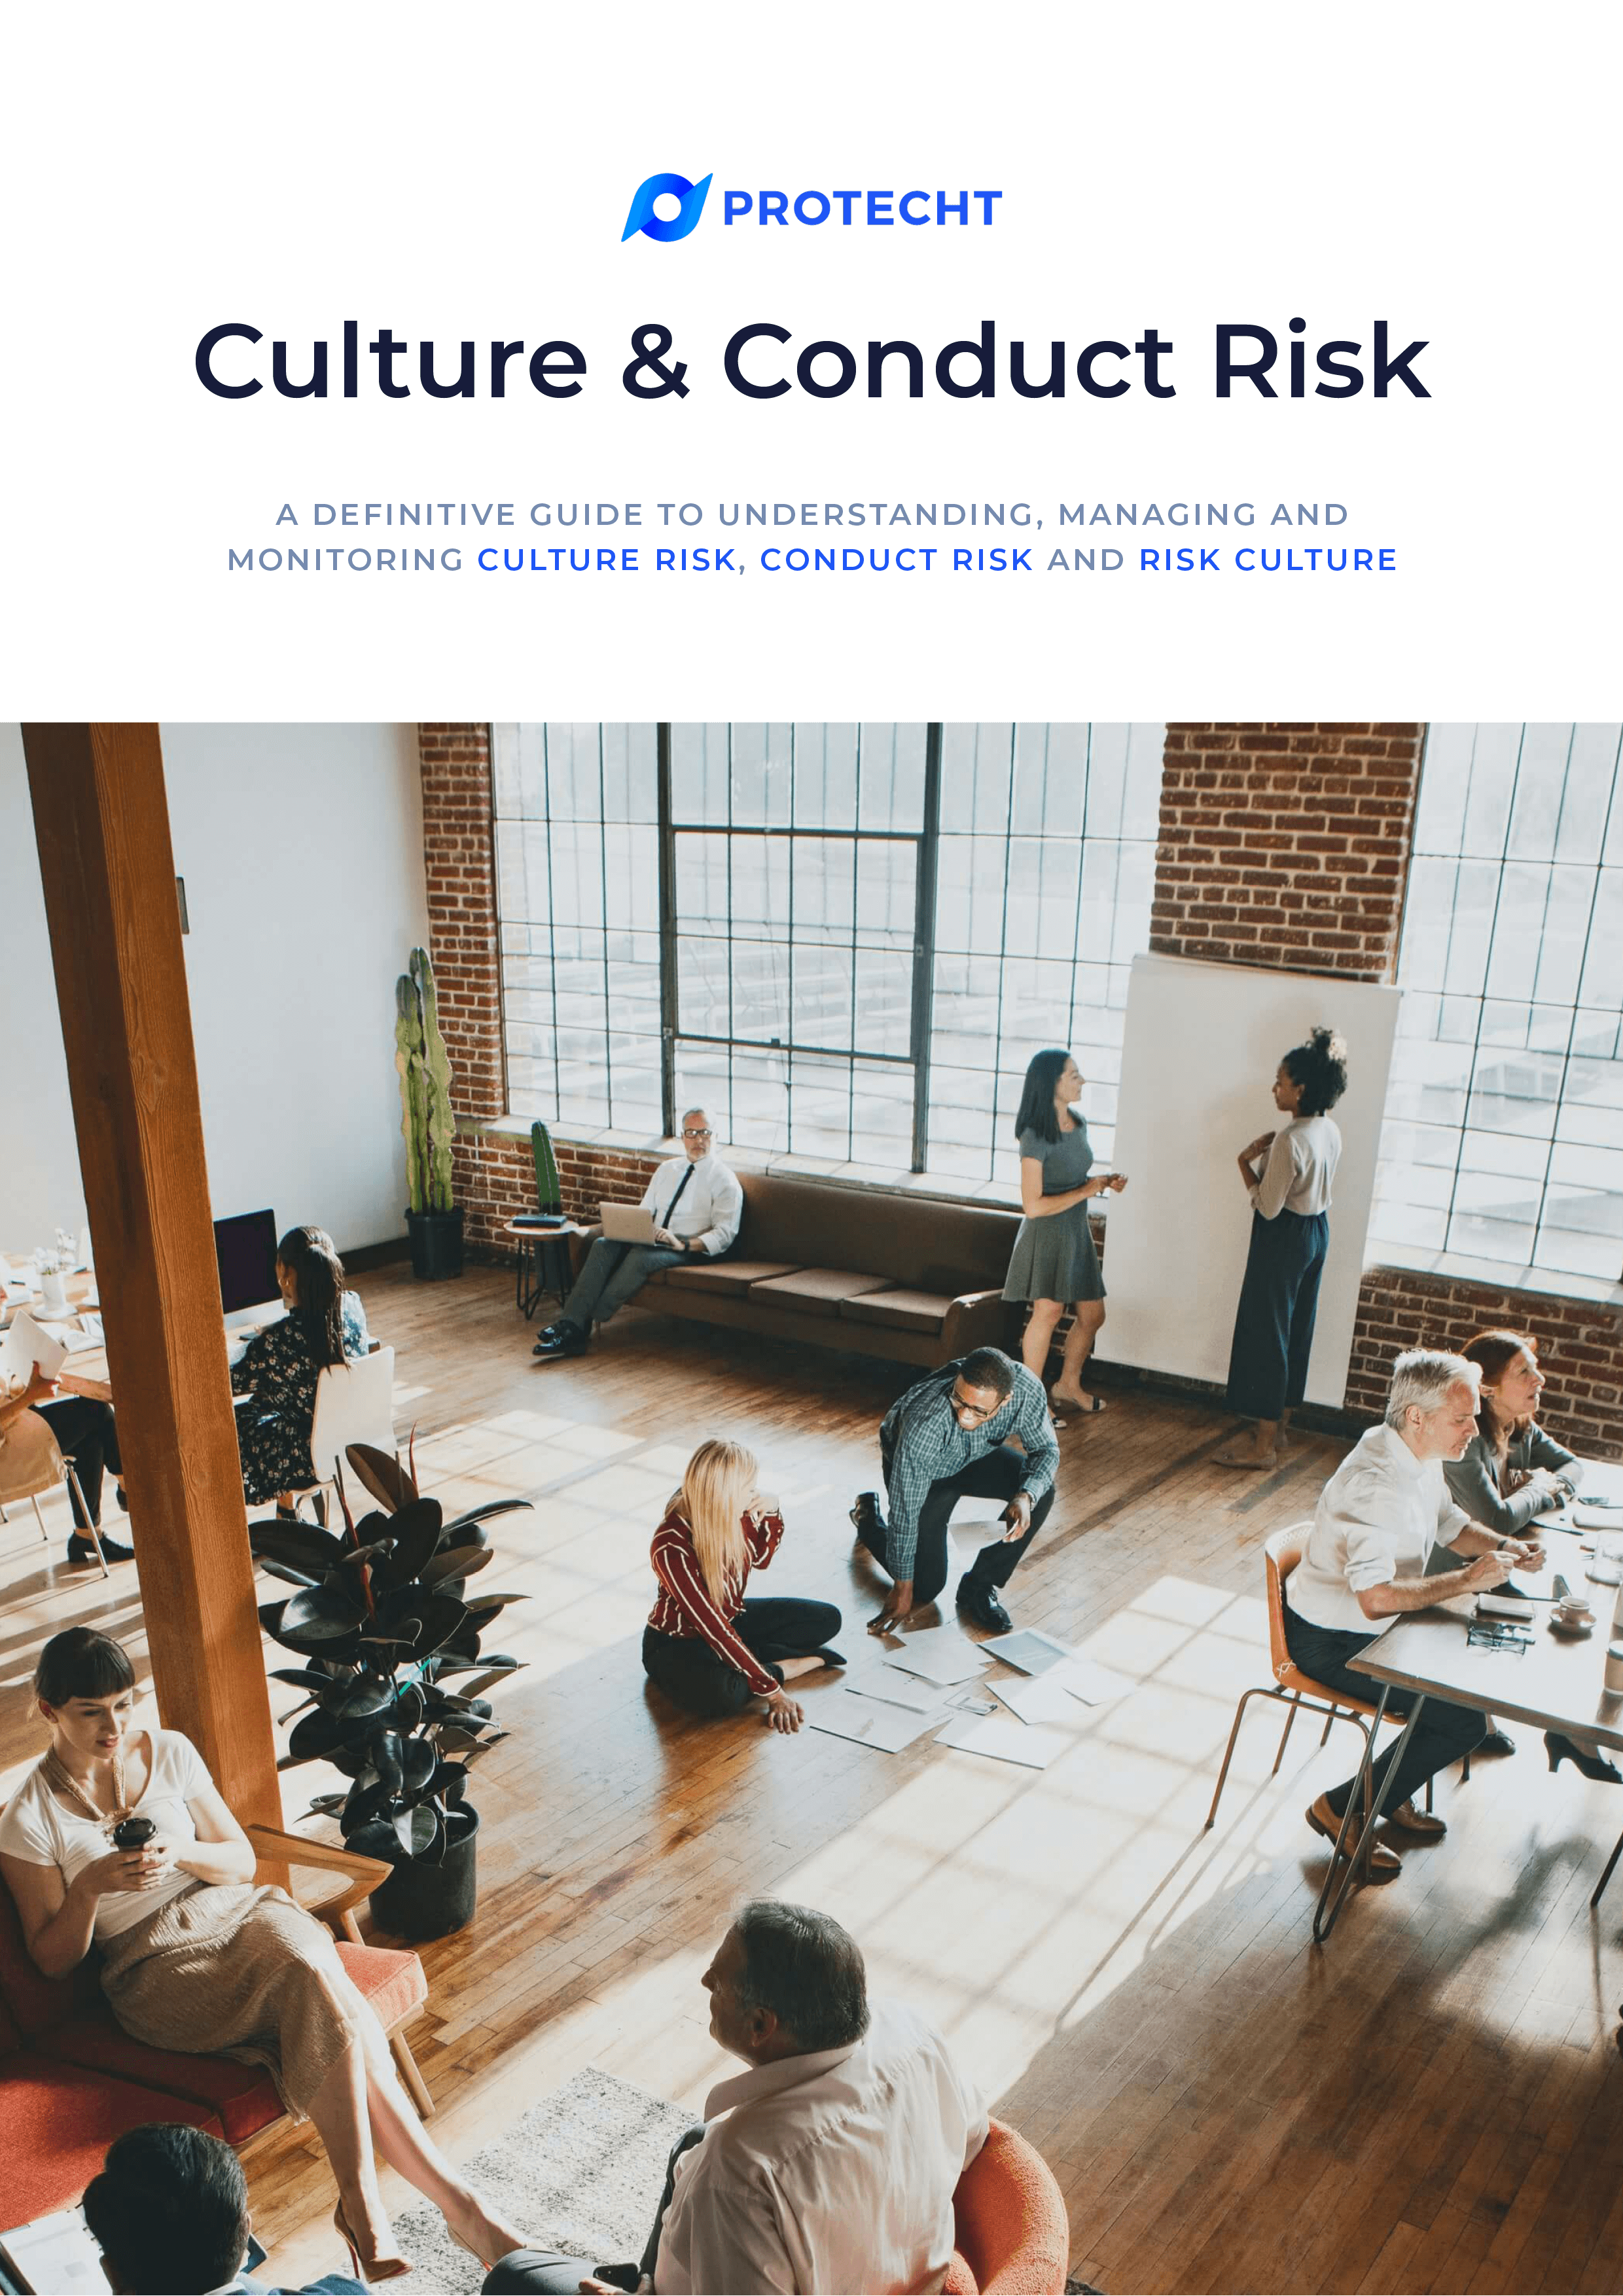 A Definitive Guide to Culture Risk, Conduct Risk and Risk Culture